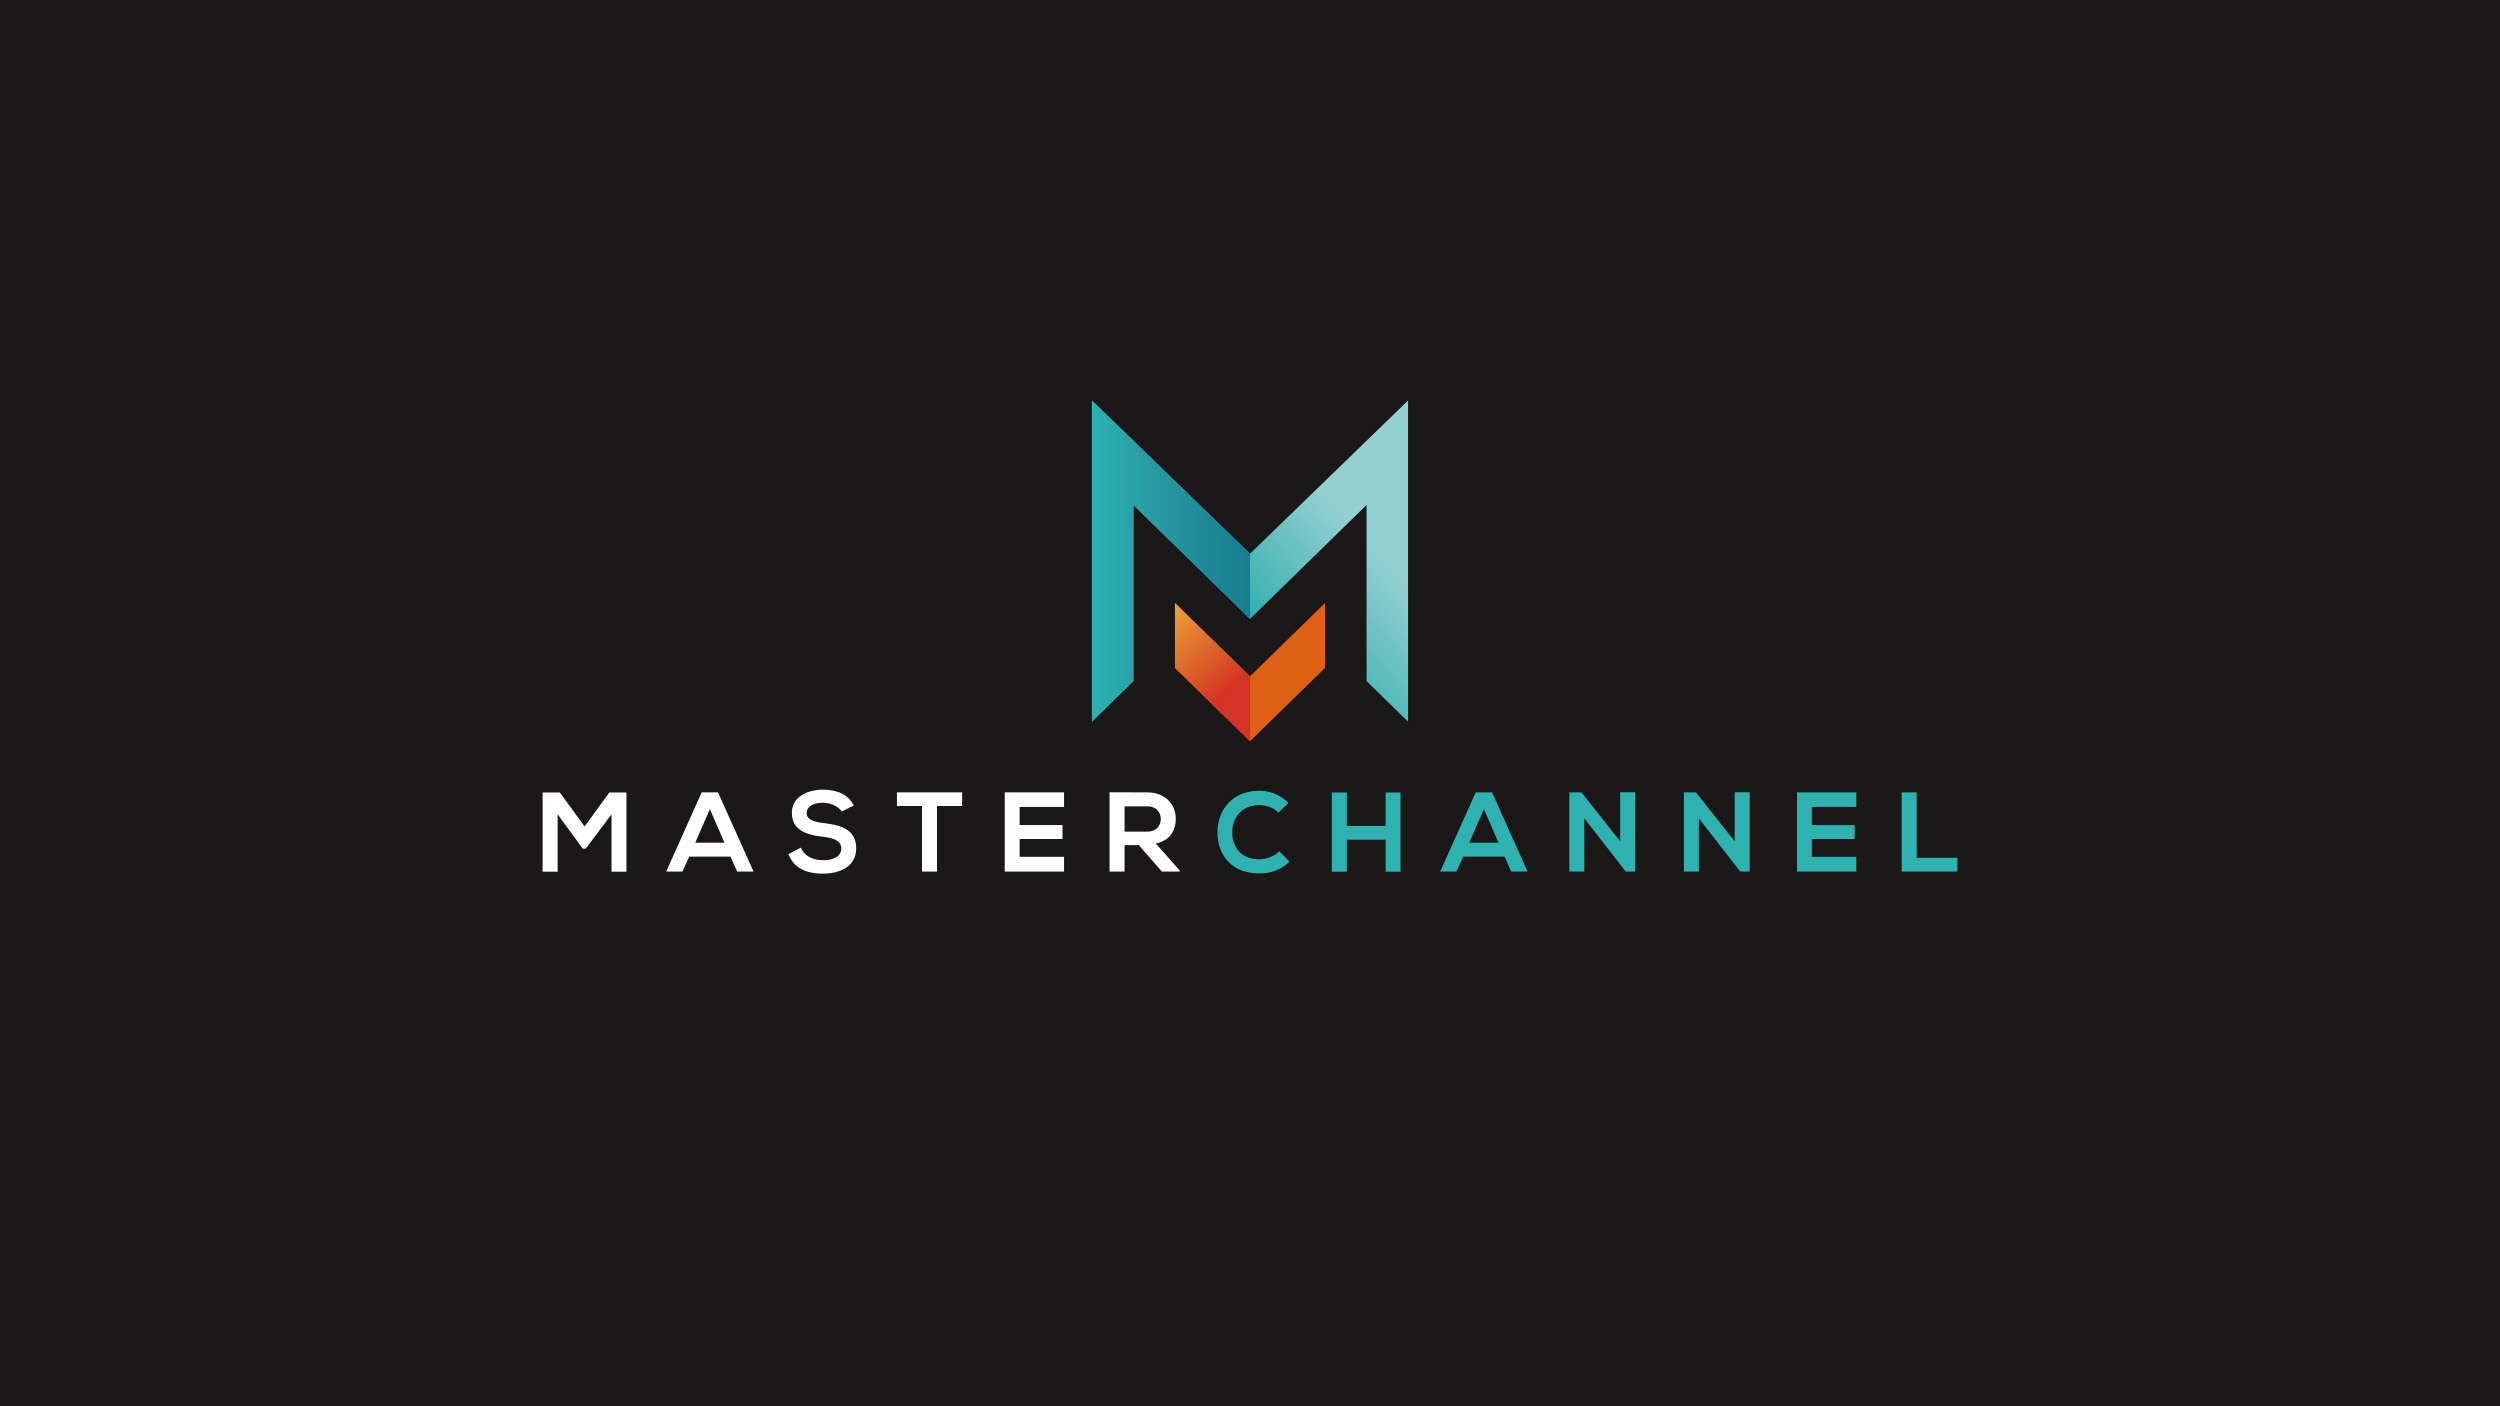 The Master Channel logo juxtaposed on a black color field.